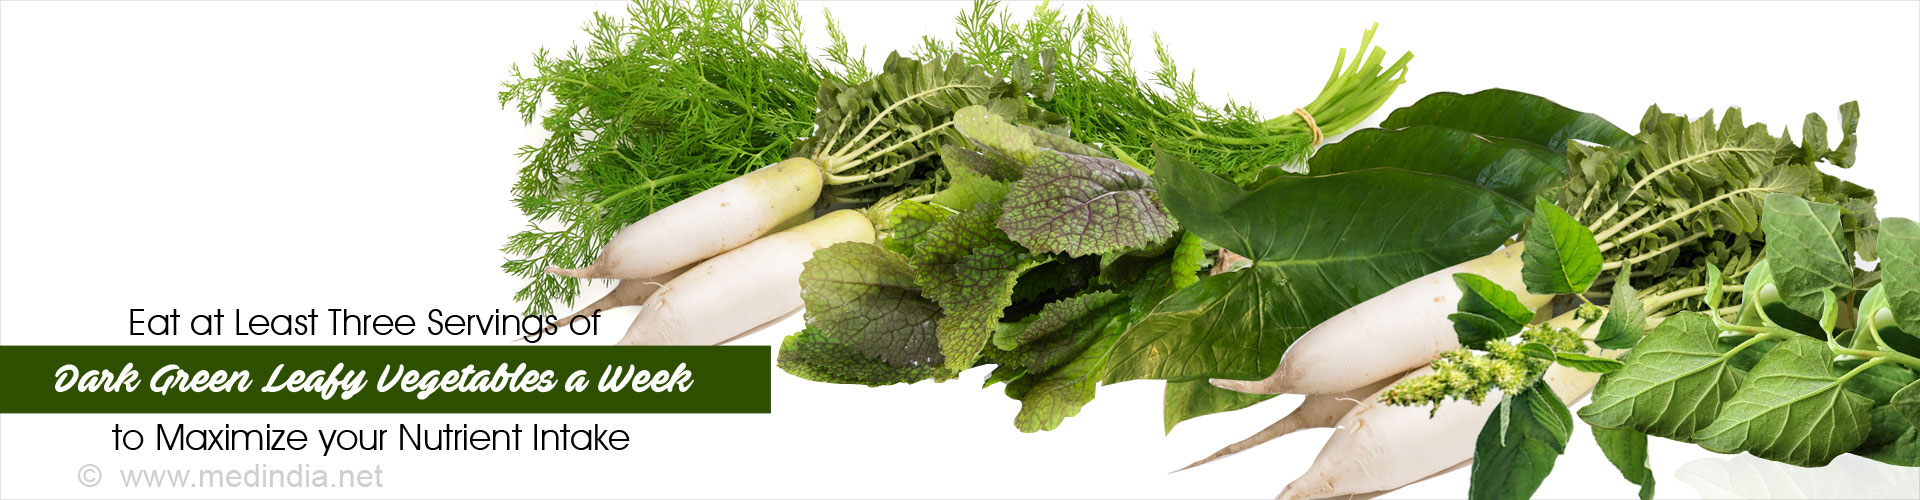 Eat Atleast Three Servings of Dark Green Leafy Vegetables a Week to Maximize Your Nutrient Intake